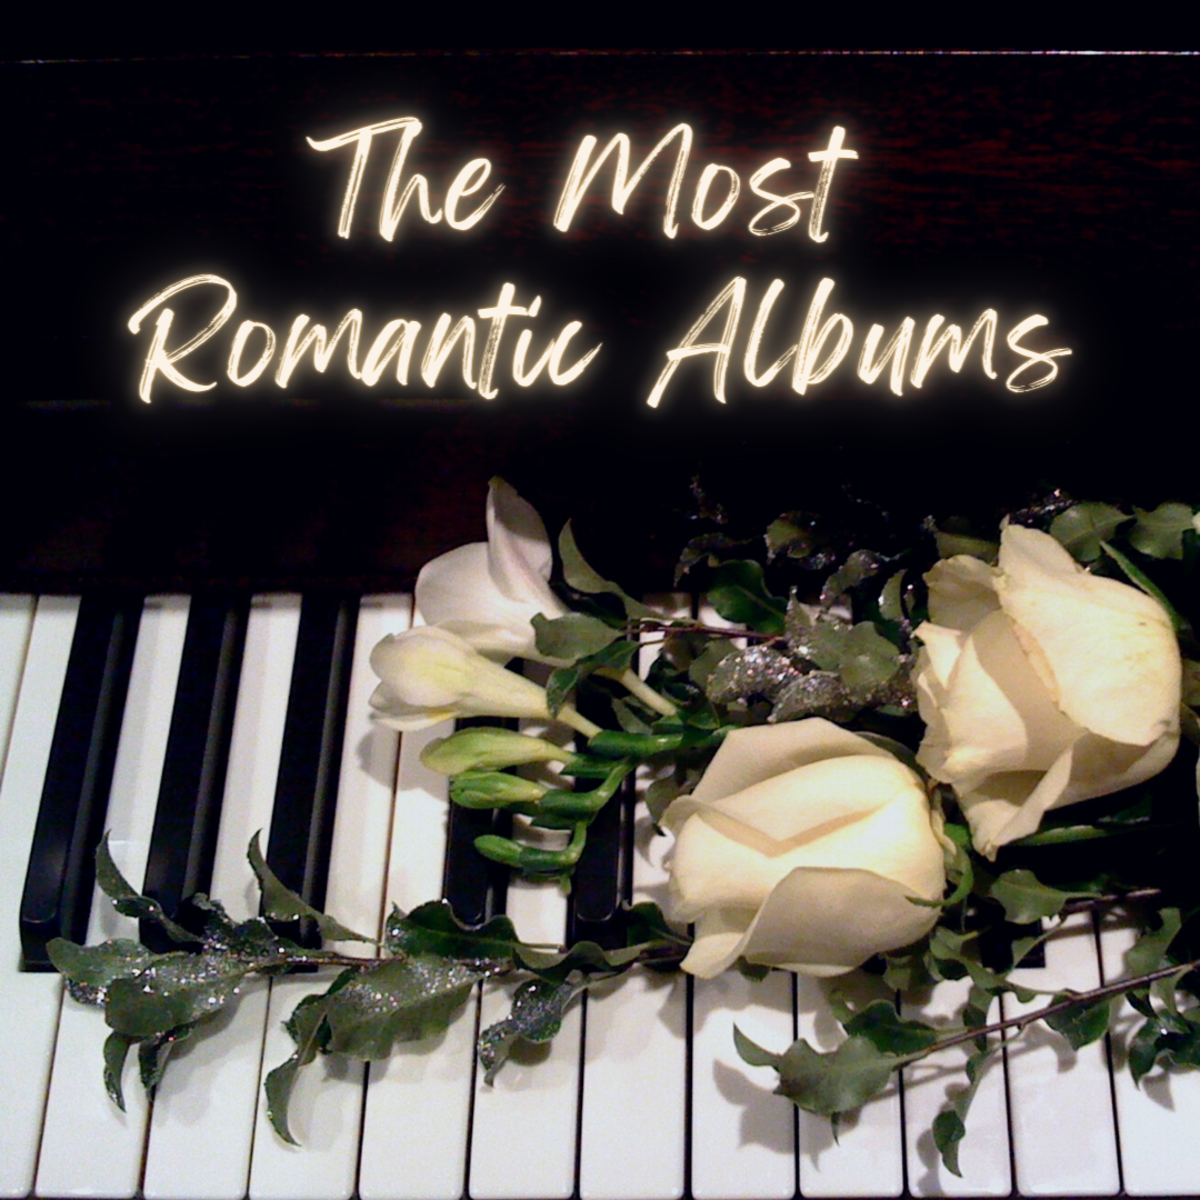 What are the best albums to set the mood for a romantic evening? Read on to find out!